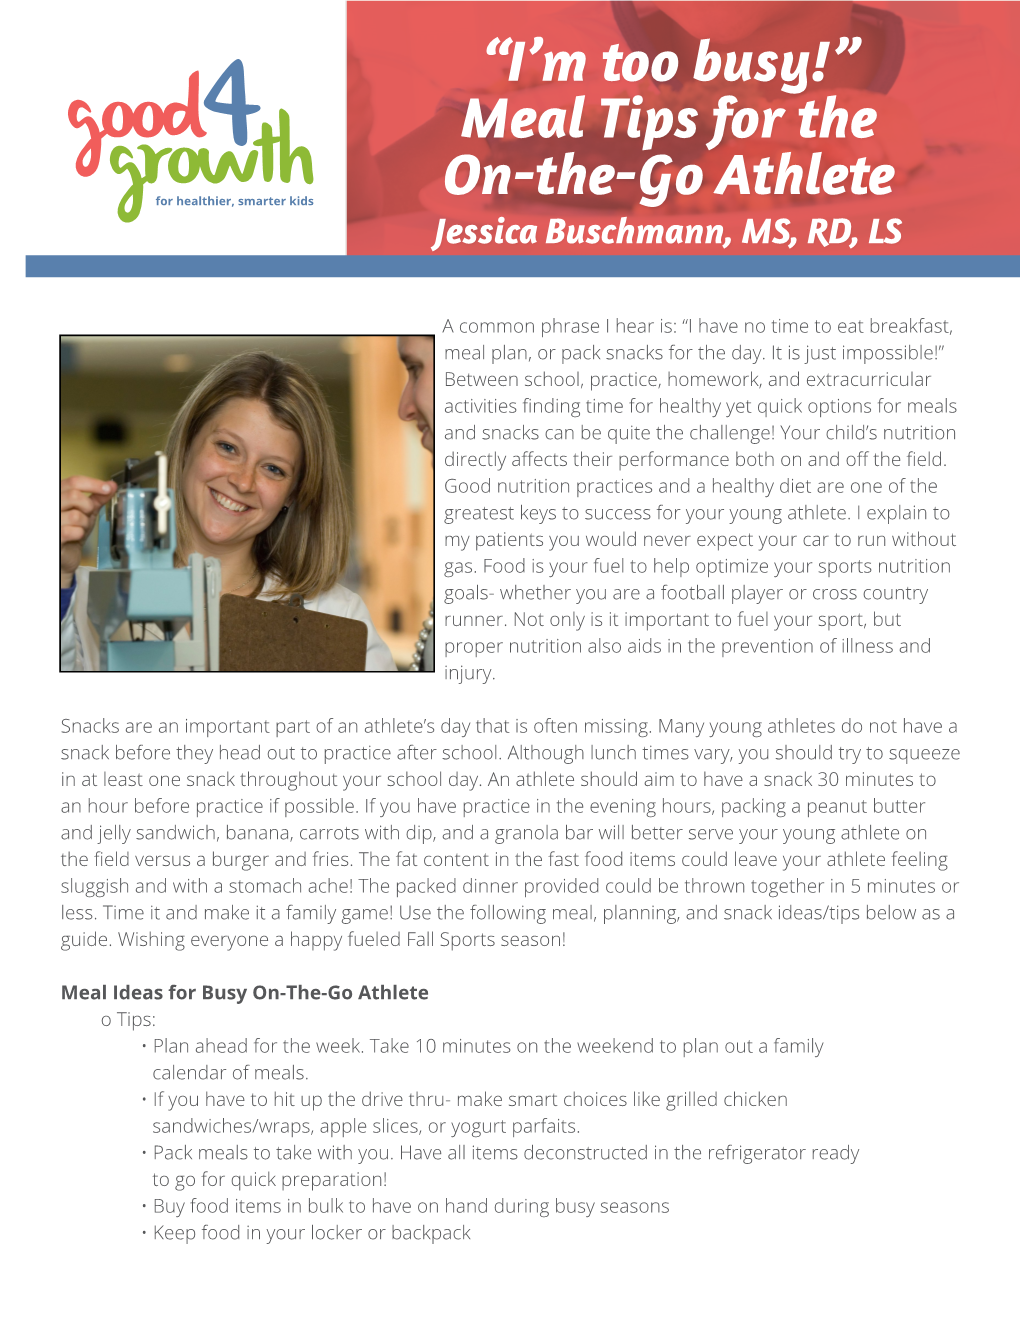 “I'm Too Busy!” Meal Tips for the On-The-Go Athlete